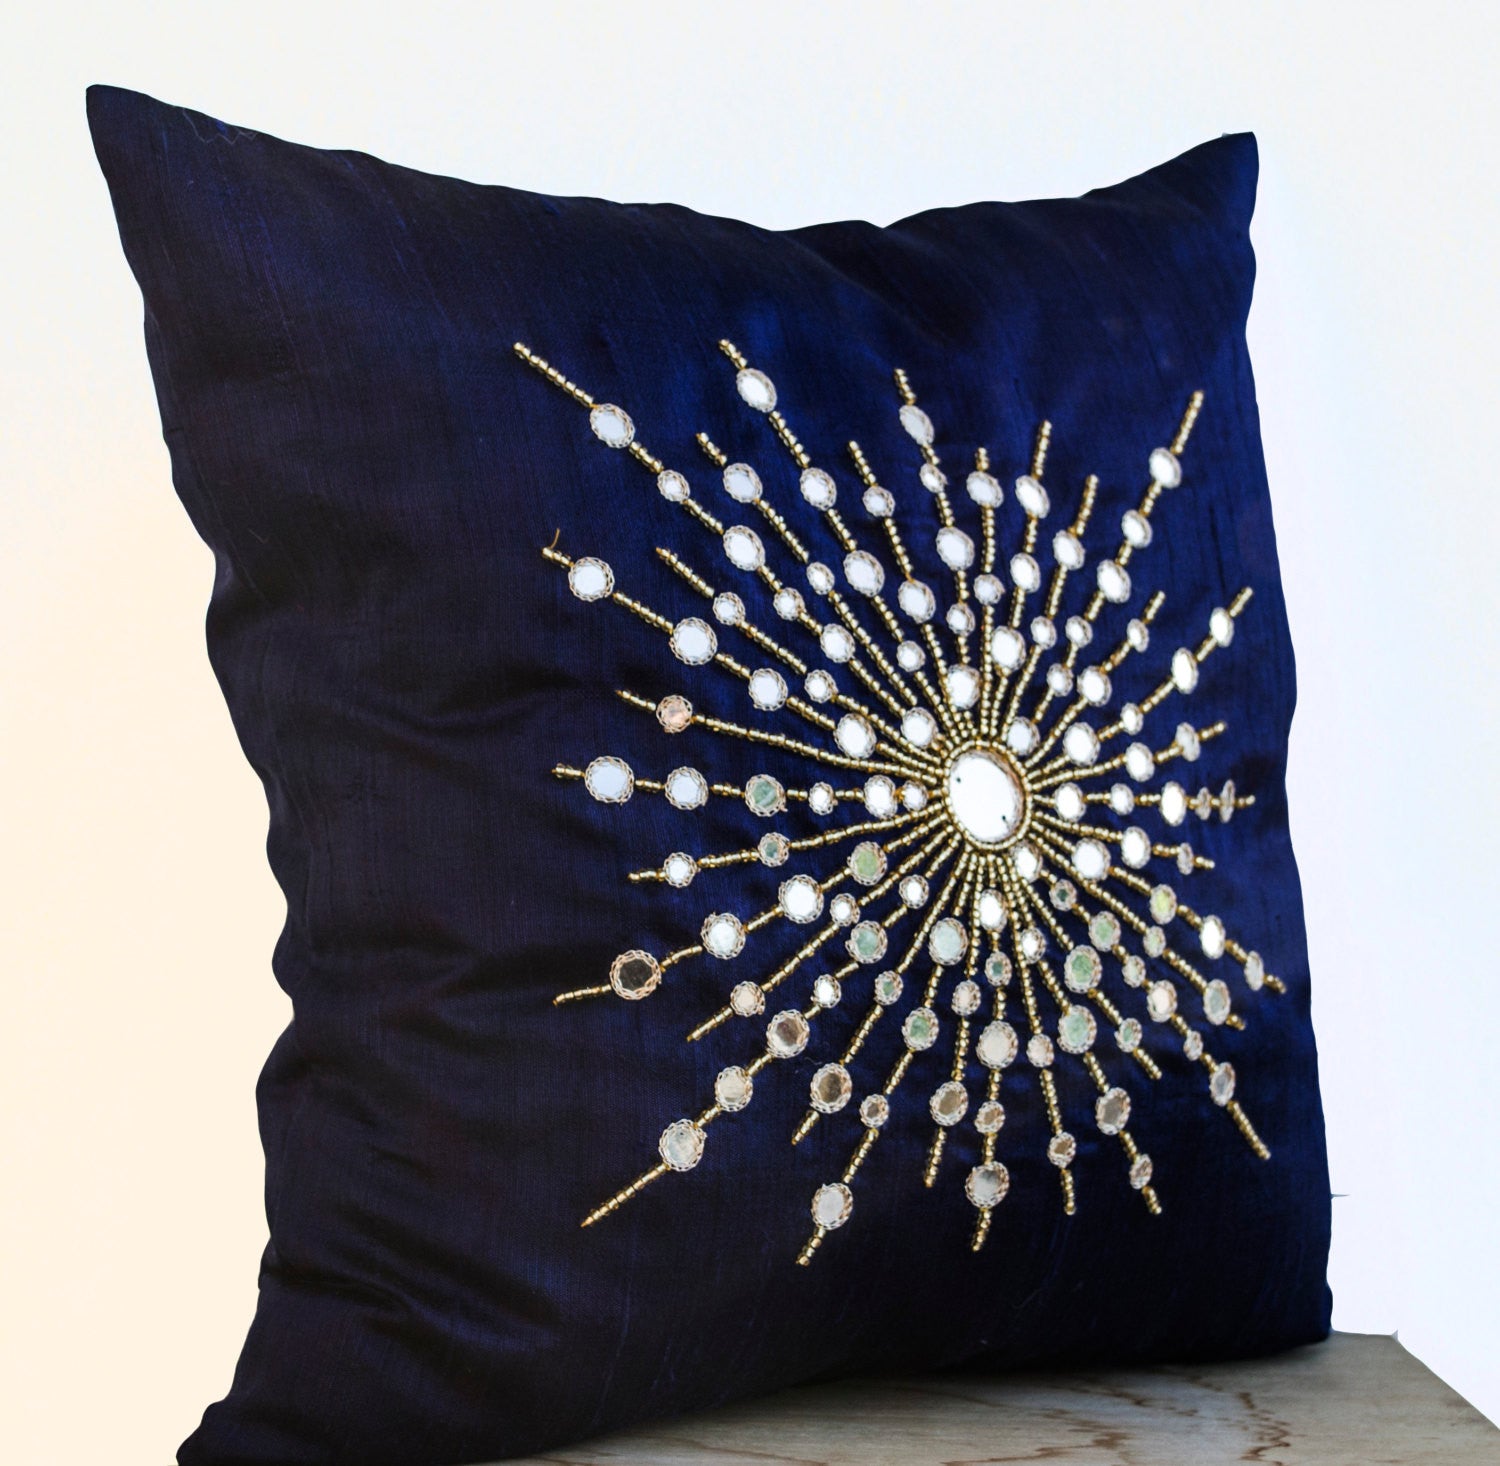 Handmade navy blue silk pillows with mirror embroidery